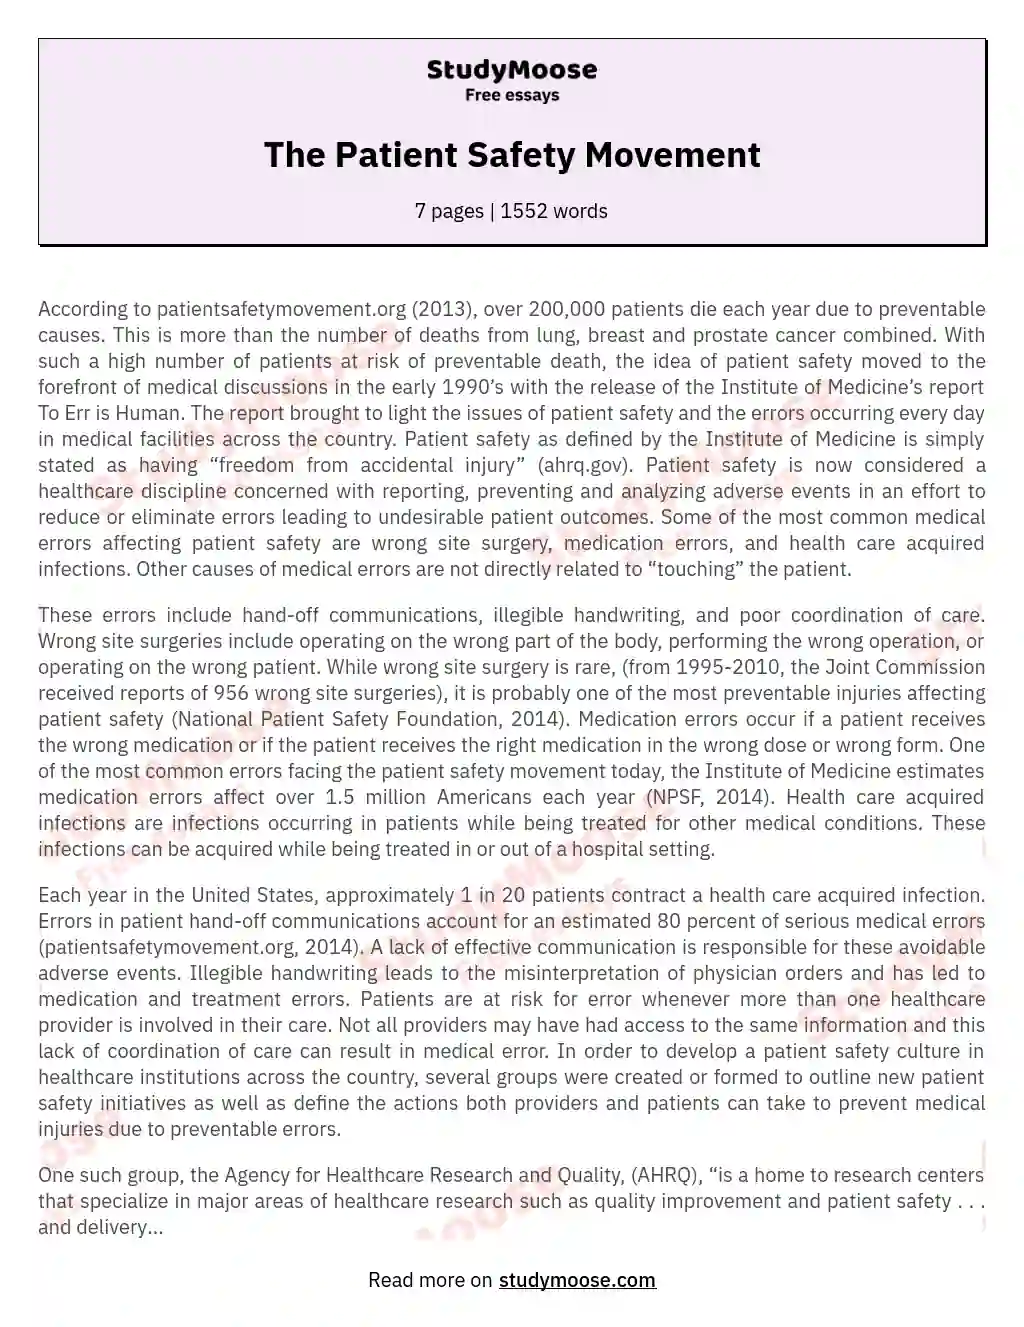 The Patient Safety Movement